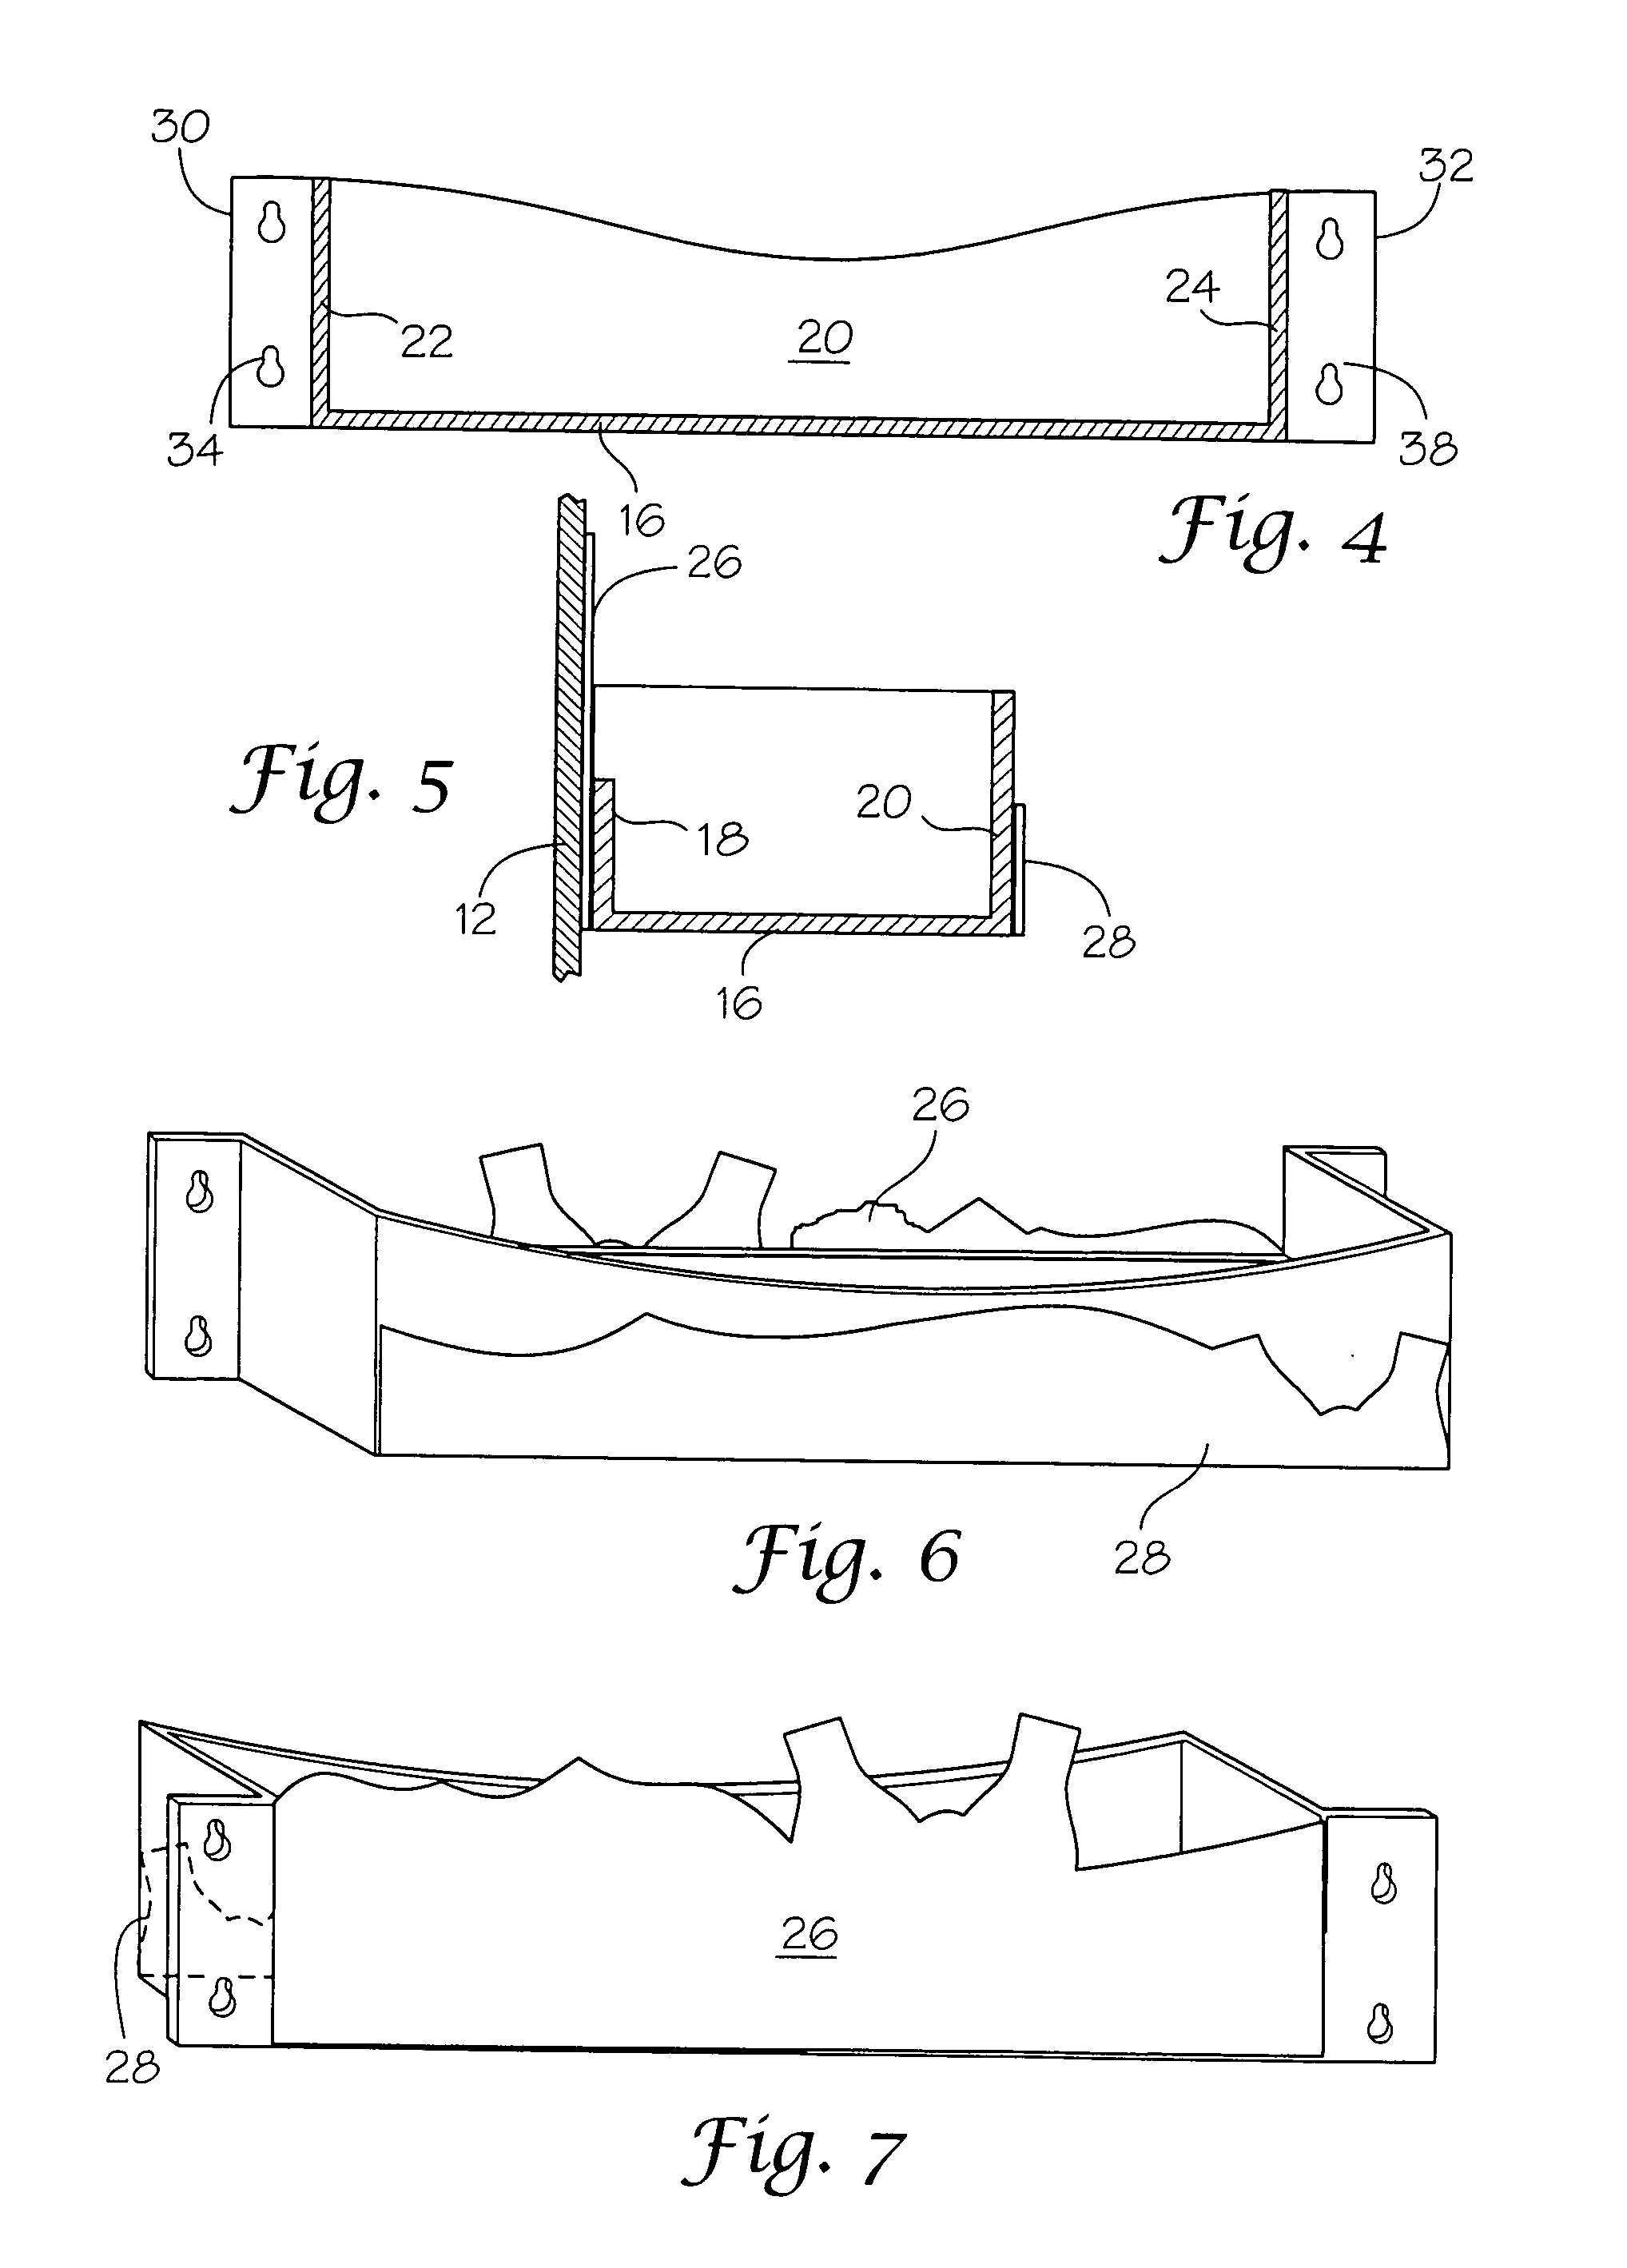 Cooler door shelf device with stick-on product panels